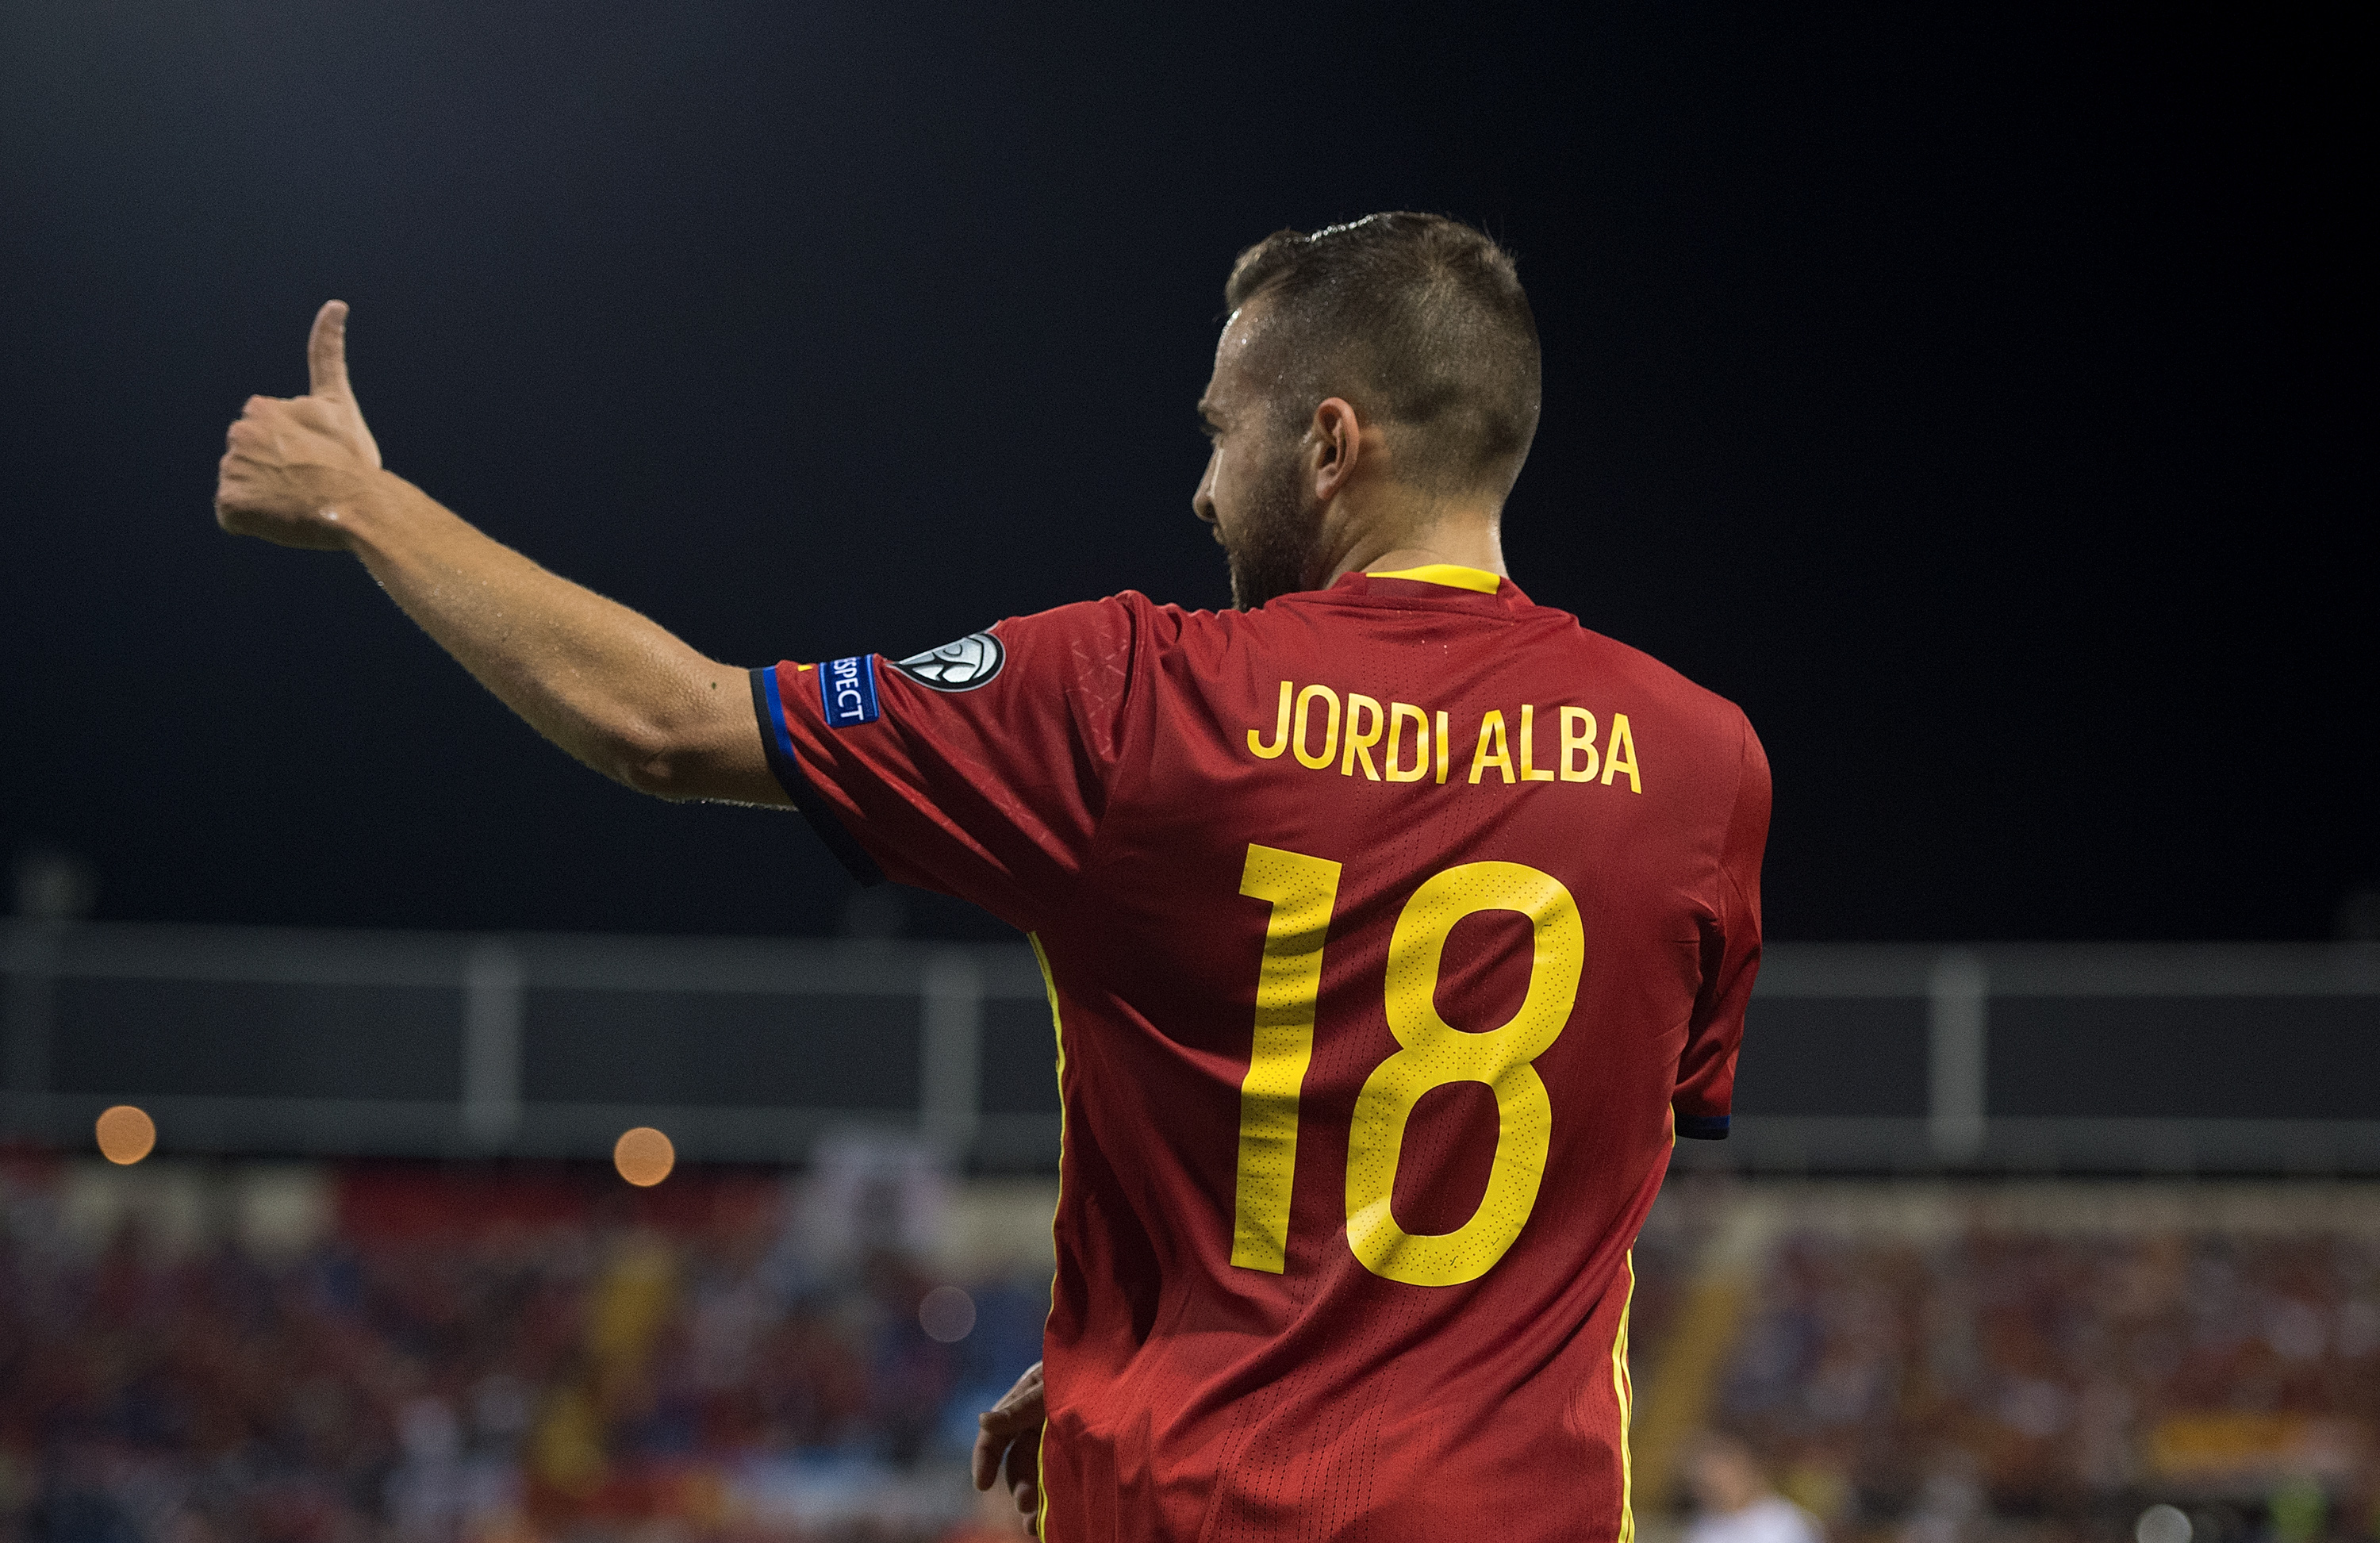 ALICANTE, SPAIN - OCTOBER 06: Jordi Alba of Spain reacts during the FIFA 2018 World Cup Qualifier between Spain and Albania at Estadio Jose Rico Perez on October 6, 2017 in Alicante, Spain. (Photo by Denis Doyle/Getty Images)